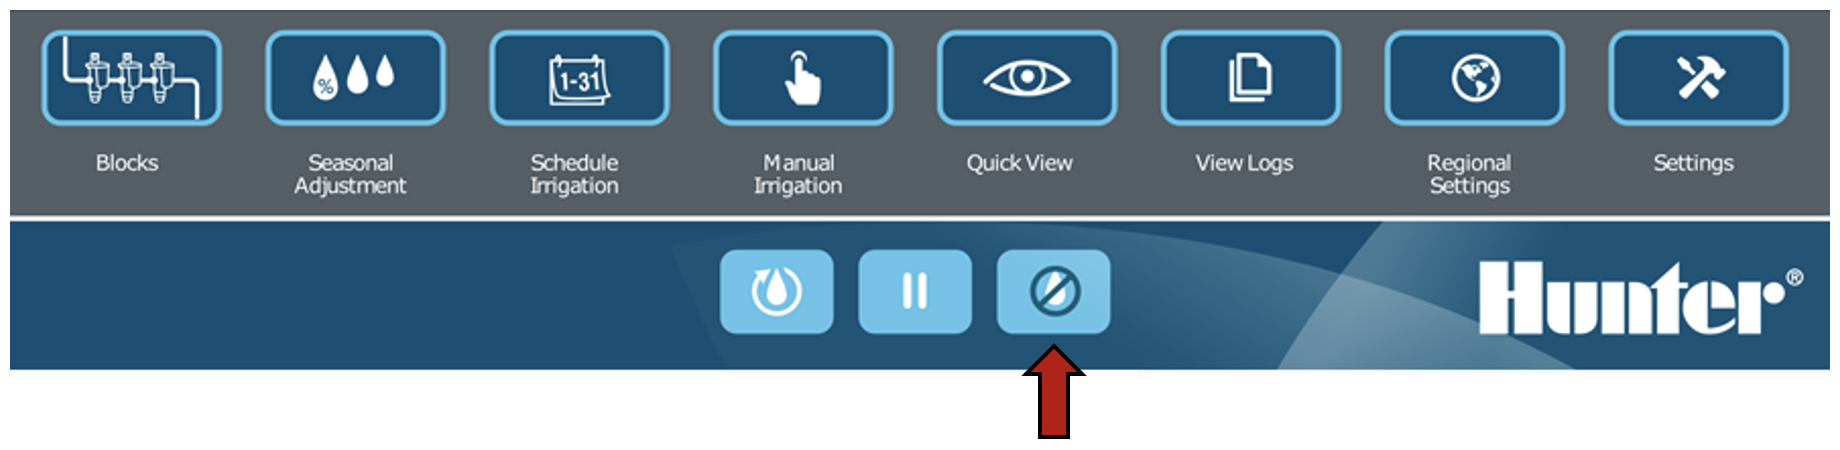 Image showing the Rain Shutdown button on the interface.